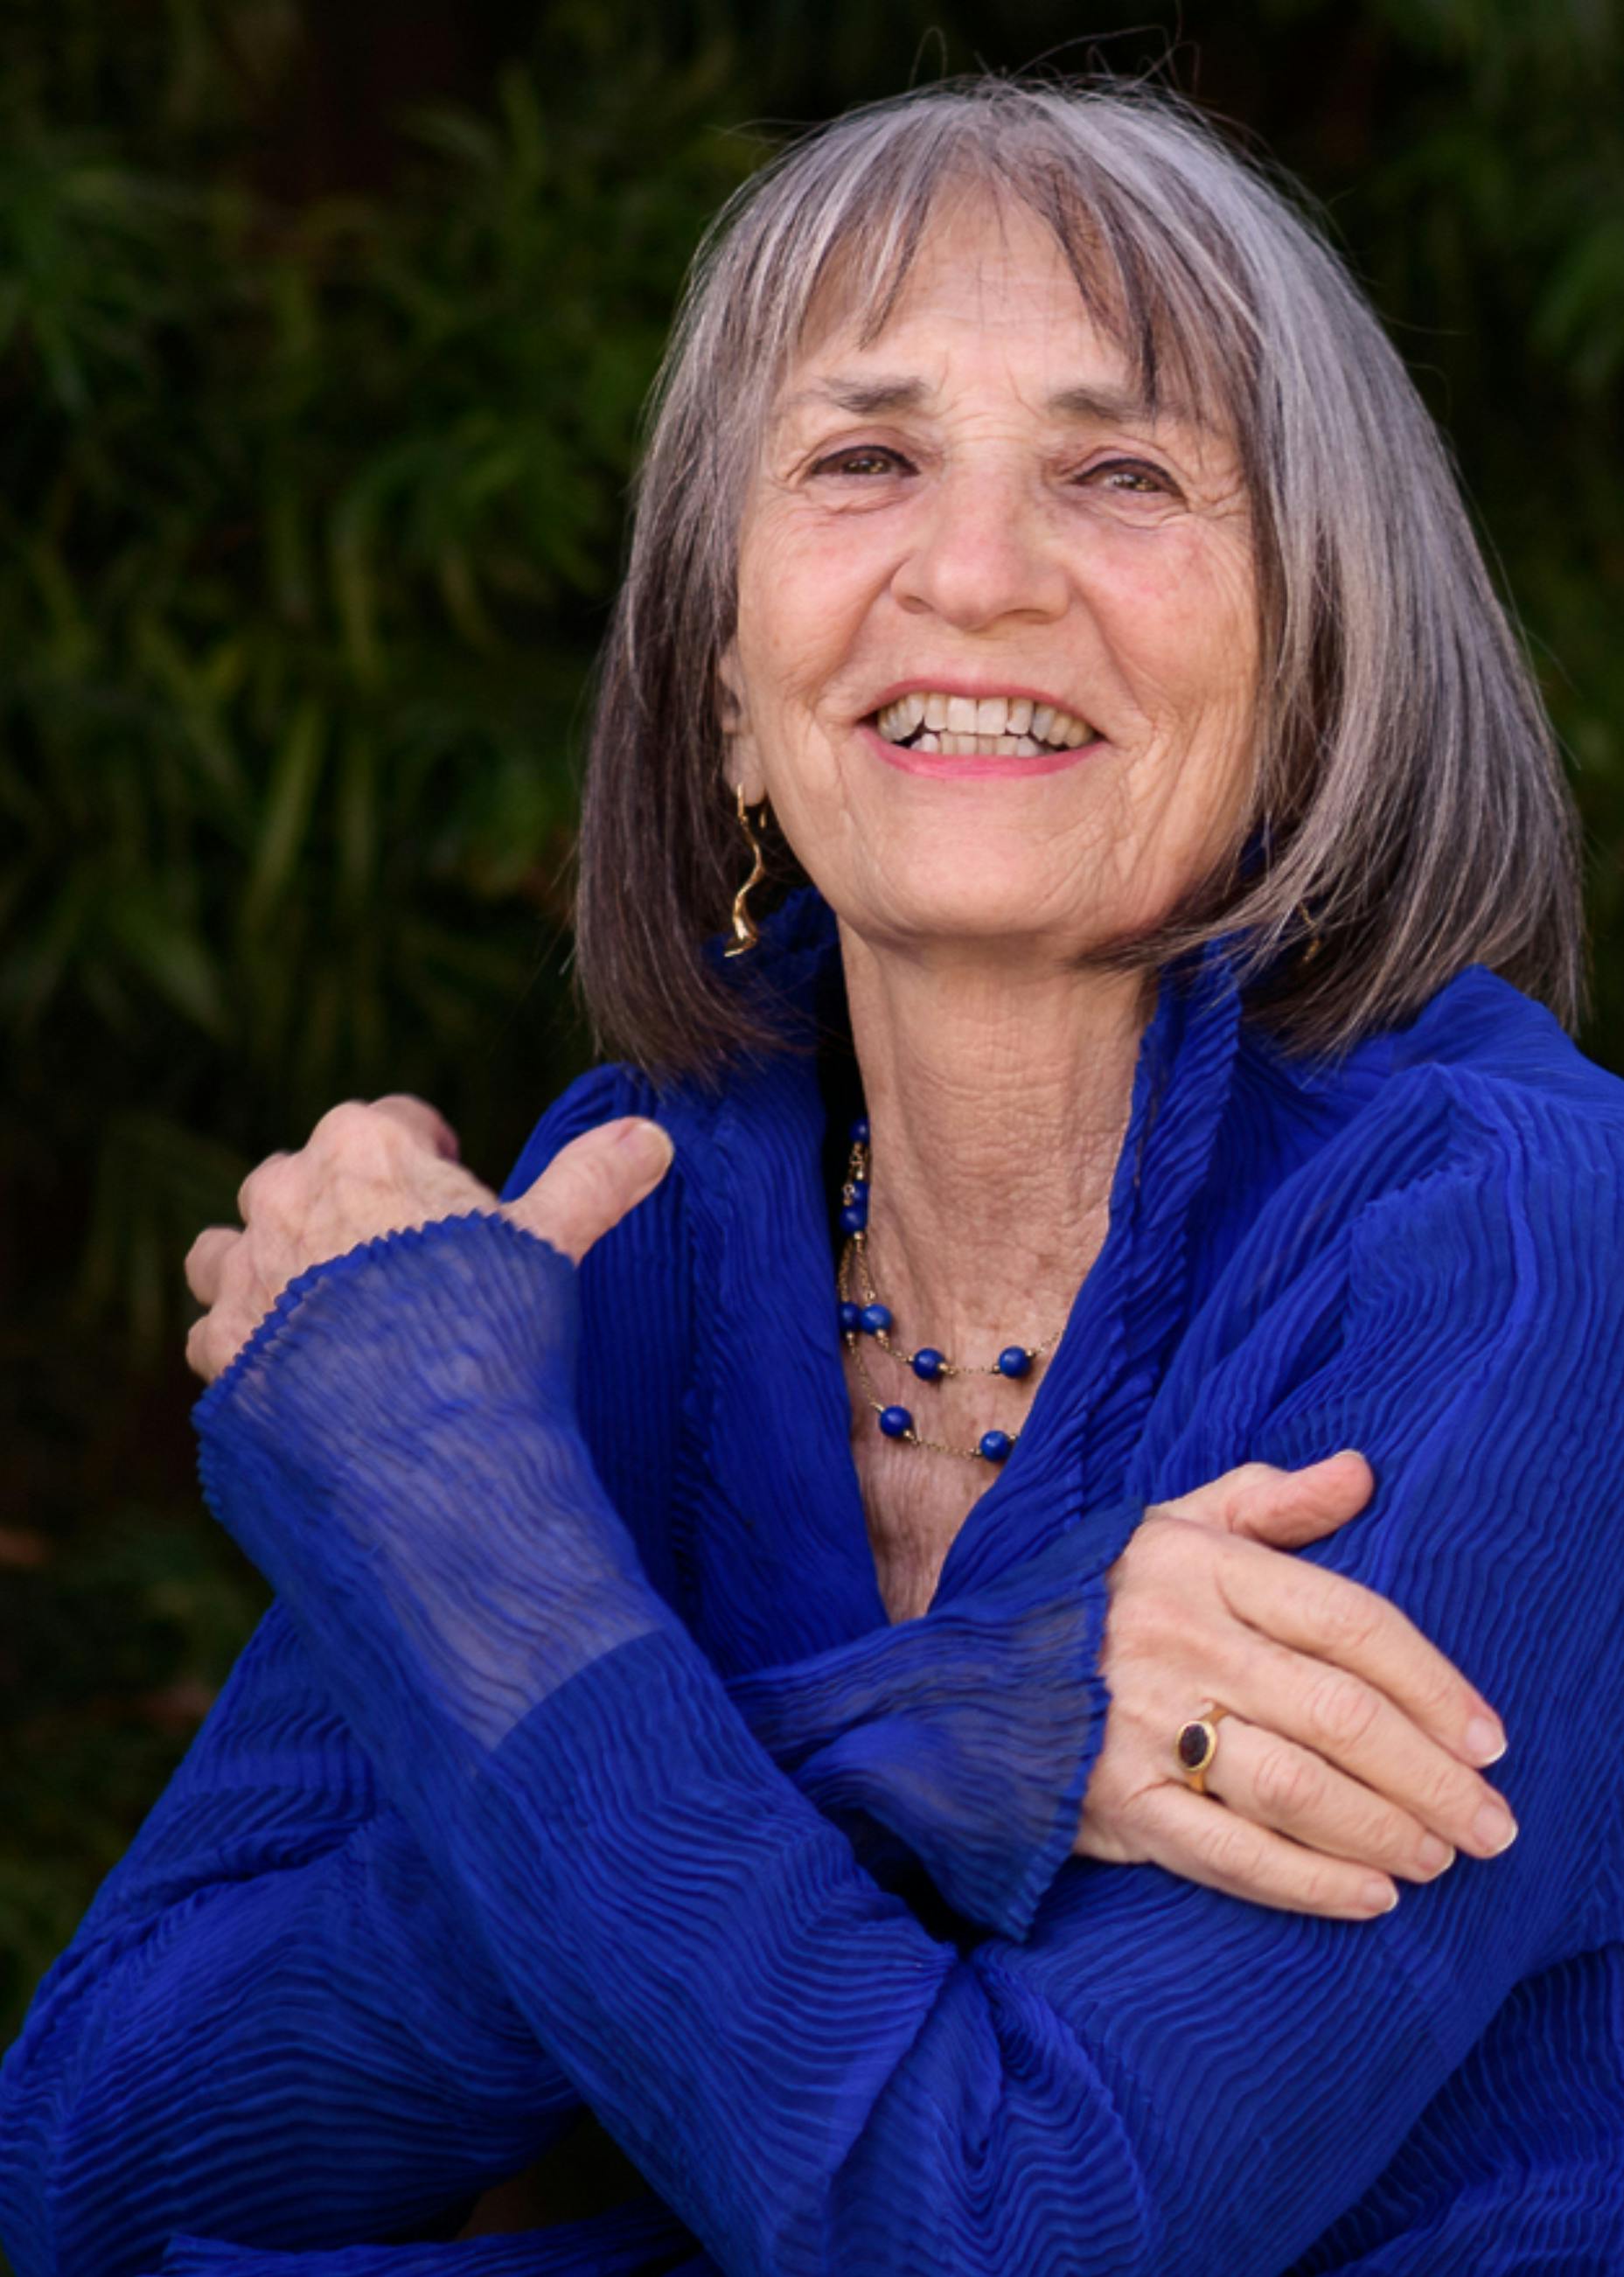 Doreen Gehry Nelson ('59) created the Design-Based Learning Method.